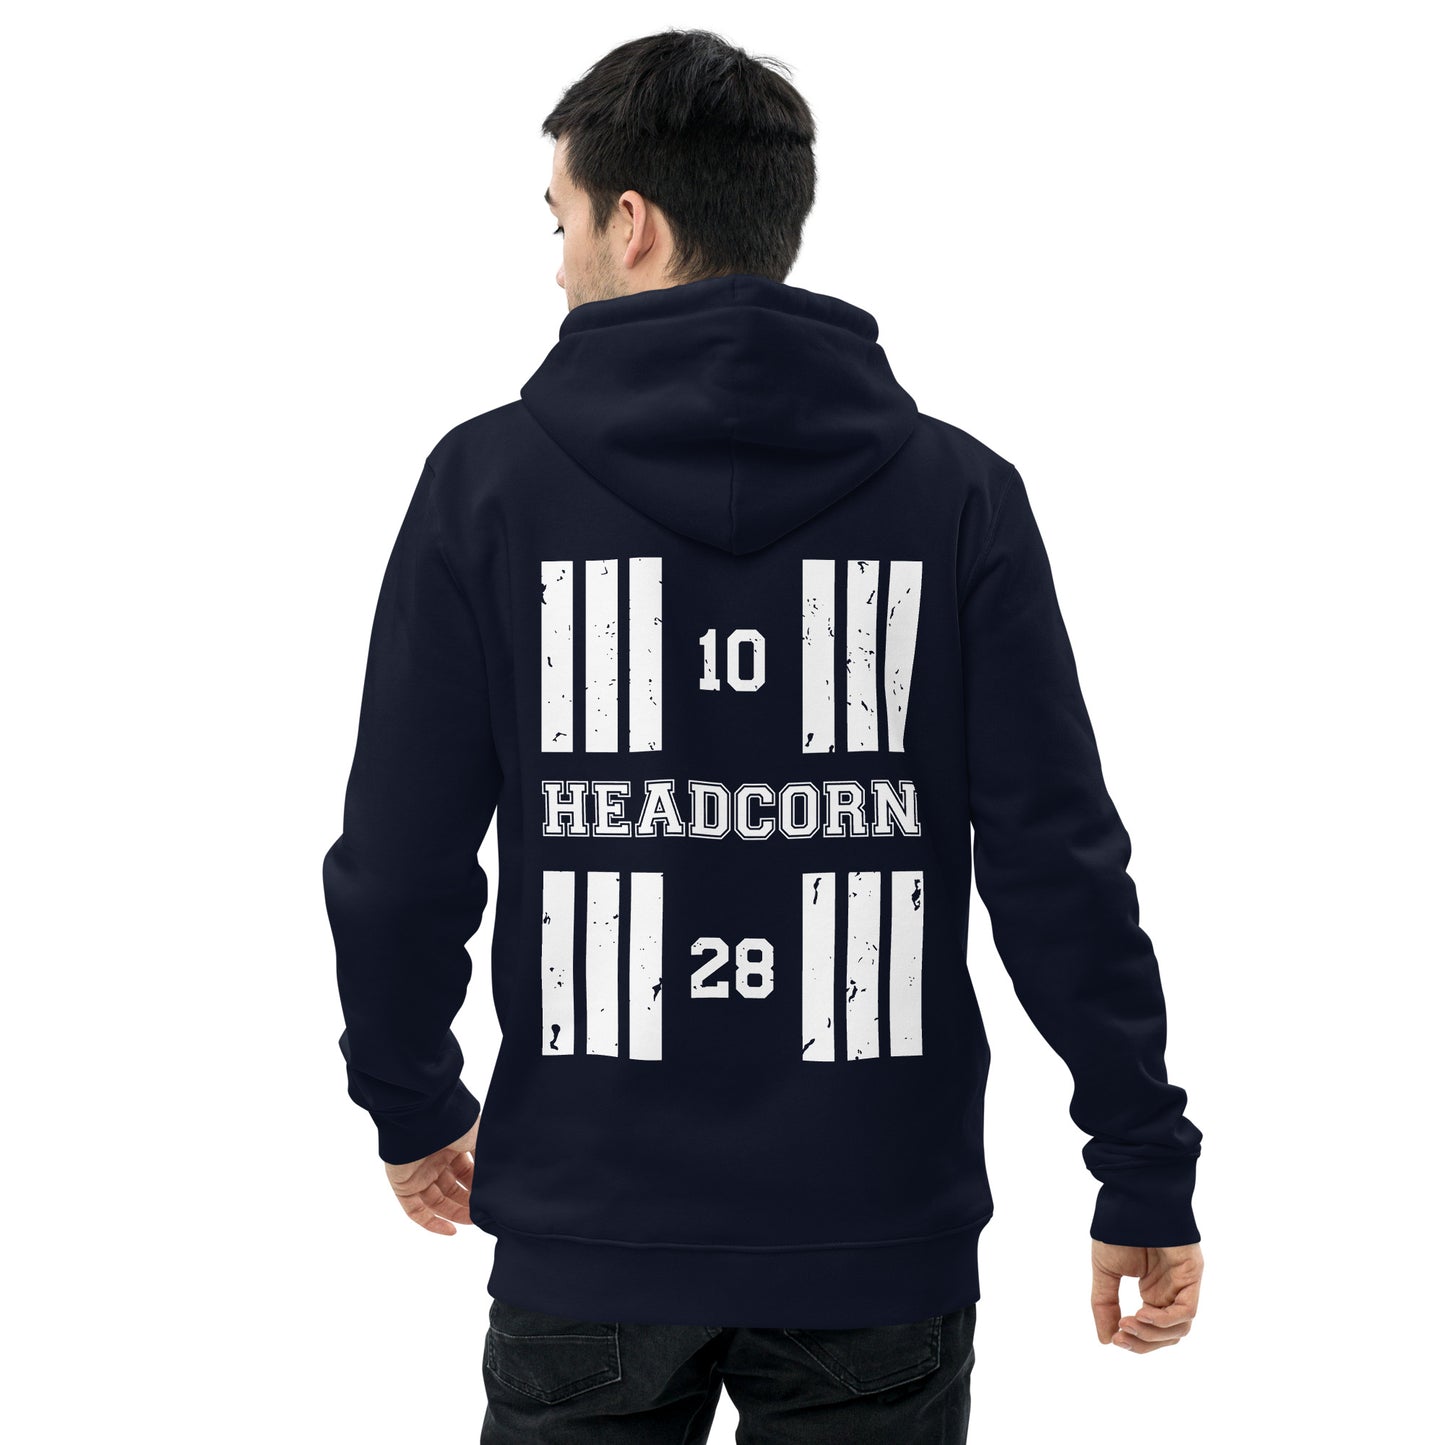 Coloured in navy the Headcorn Aerodrome Designator heavyweight hoodie features a discreet collegiate print on the front with a bold print featuring the airport's name and designator, framed by stylised distressed threshold markings on the back.